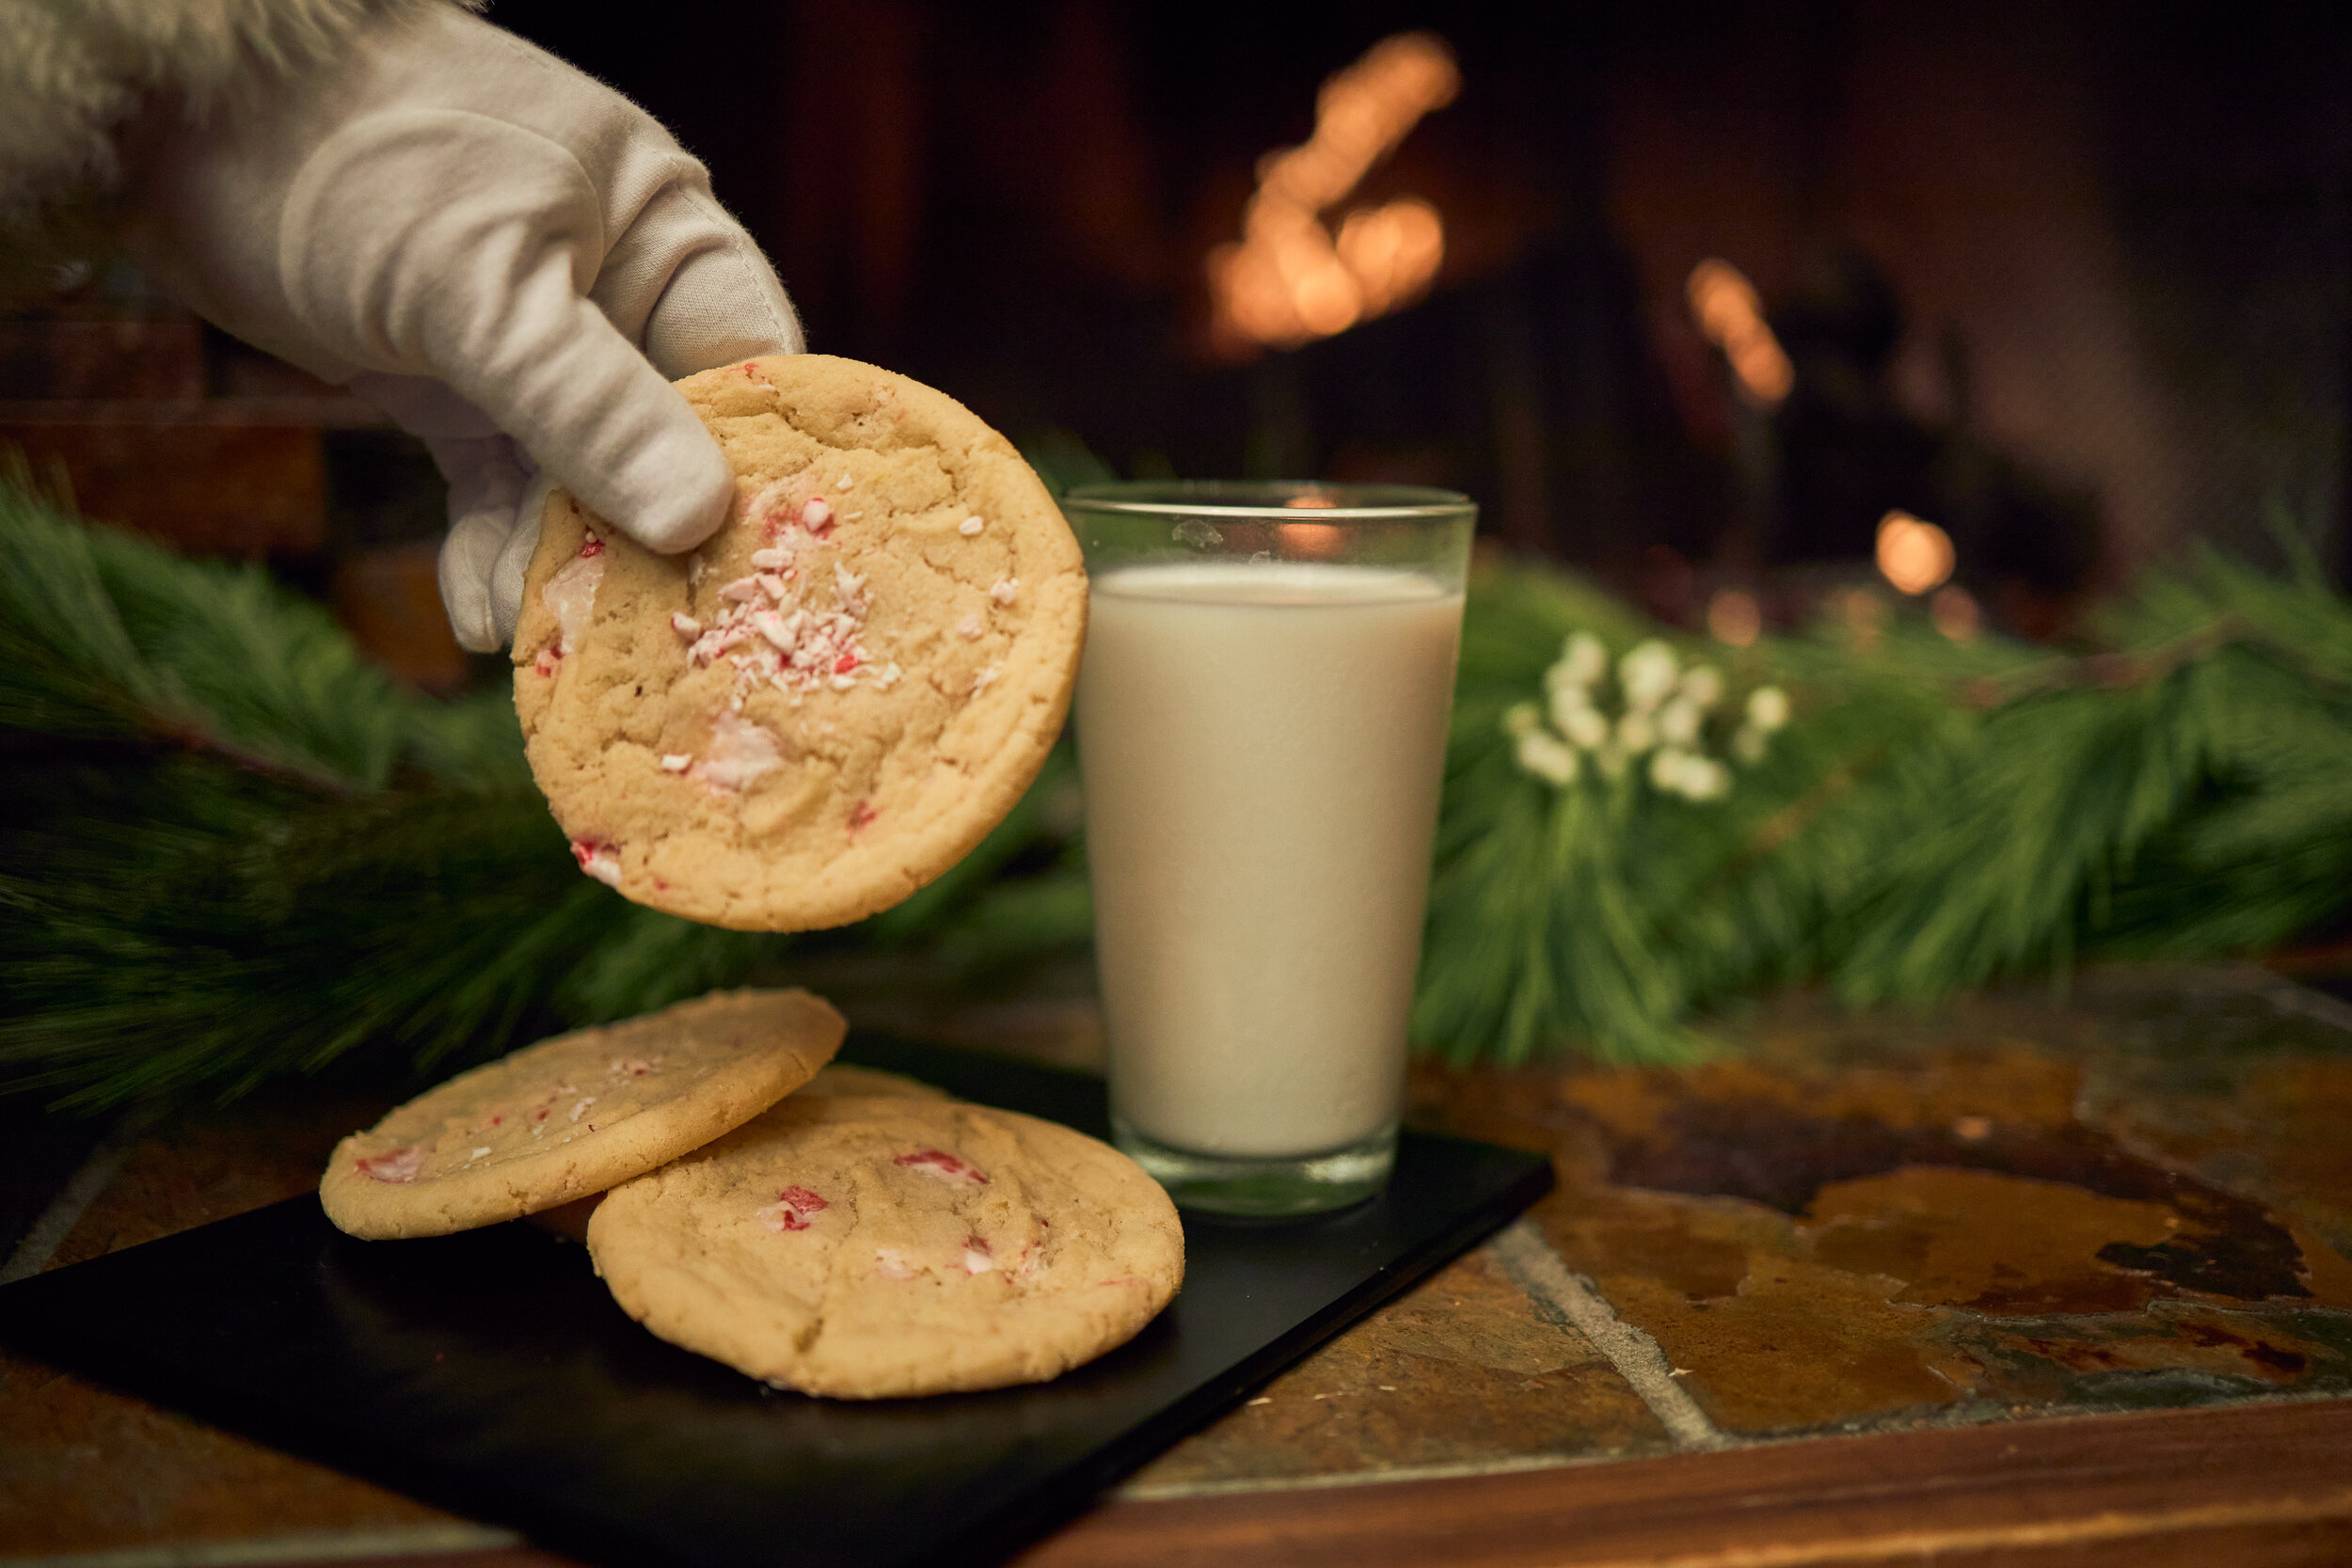 “Ode to Santa” - Milk or Eggnog with Candy Cane Cookies